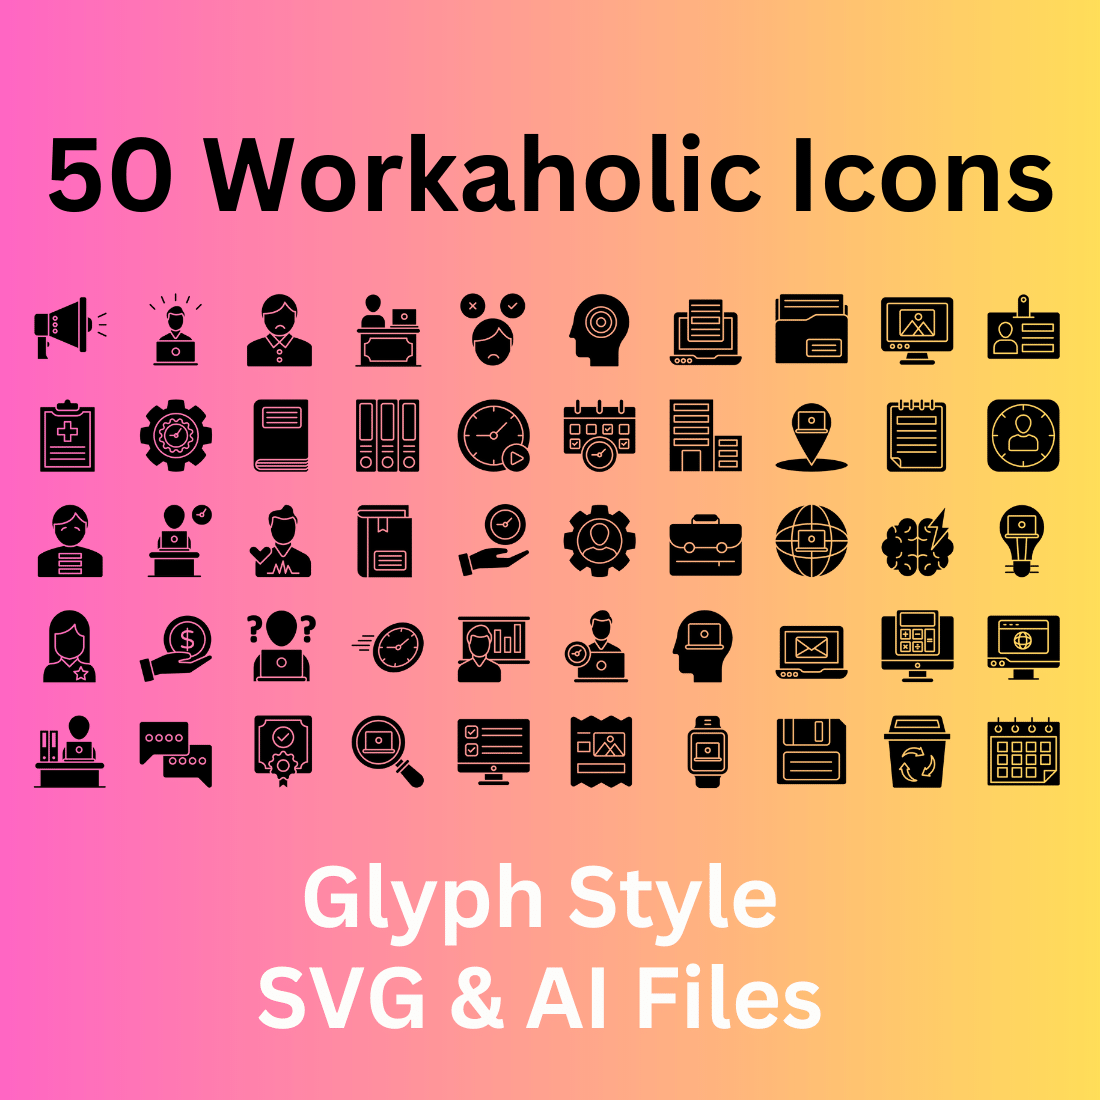 Workaholic Icon Set 50 Glyph Icons - SVG And AI Files cover image.